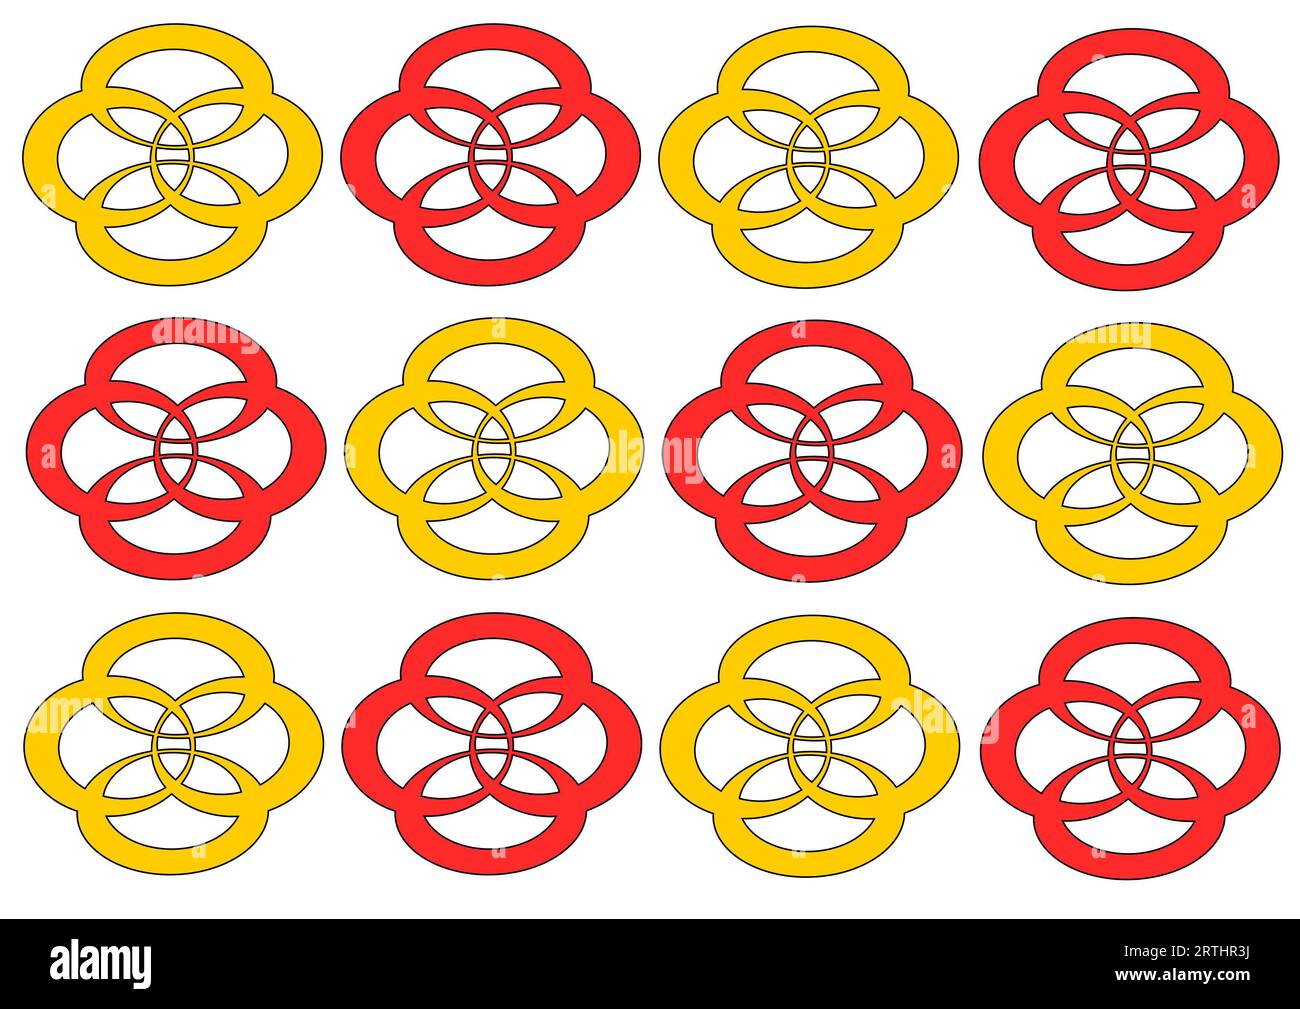 Fantasy pattern in yellow and red, white background, illustration Stock Photo